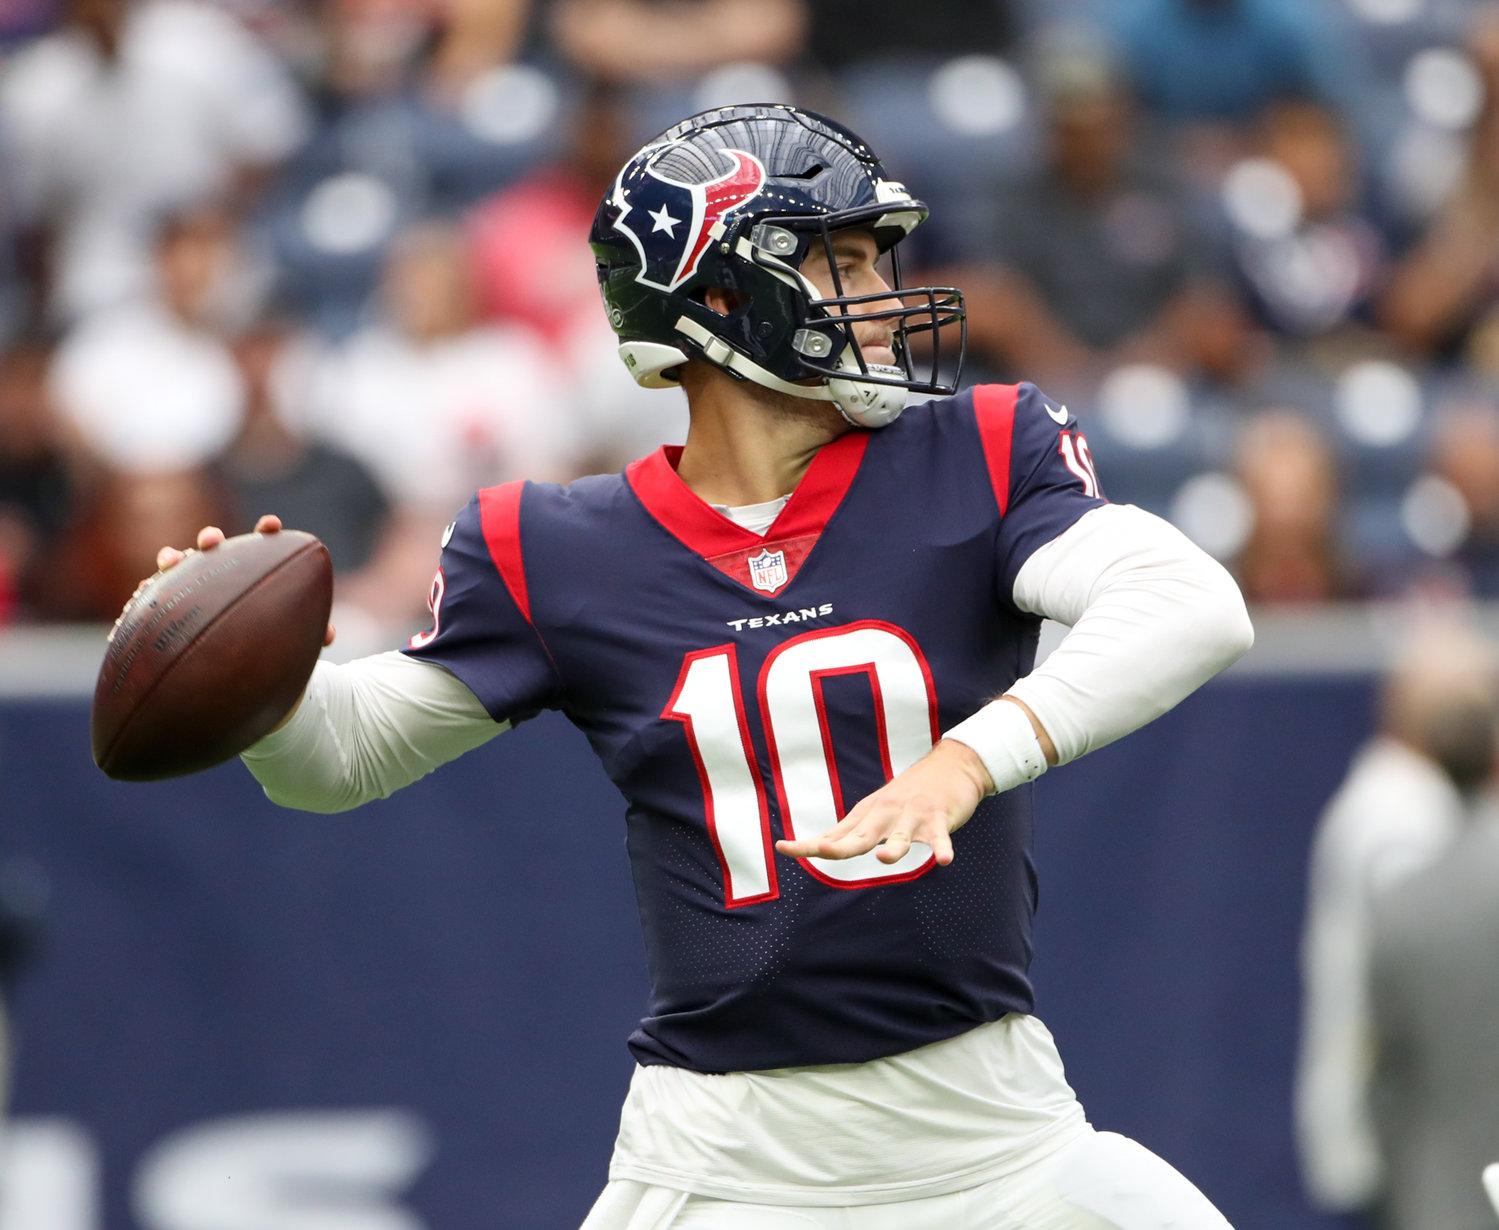 Houston Texans quarterback Davis Mills (10) passes the ball during an NFL game between Houston and the Los Angeles Rams on October 31, 2021 in Houston, Texas.